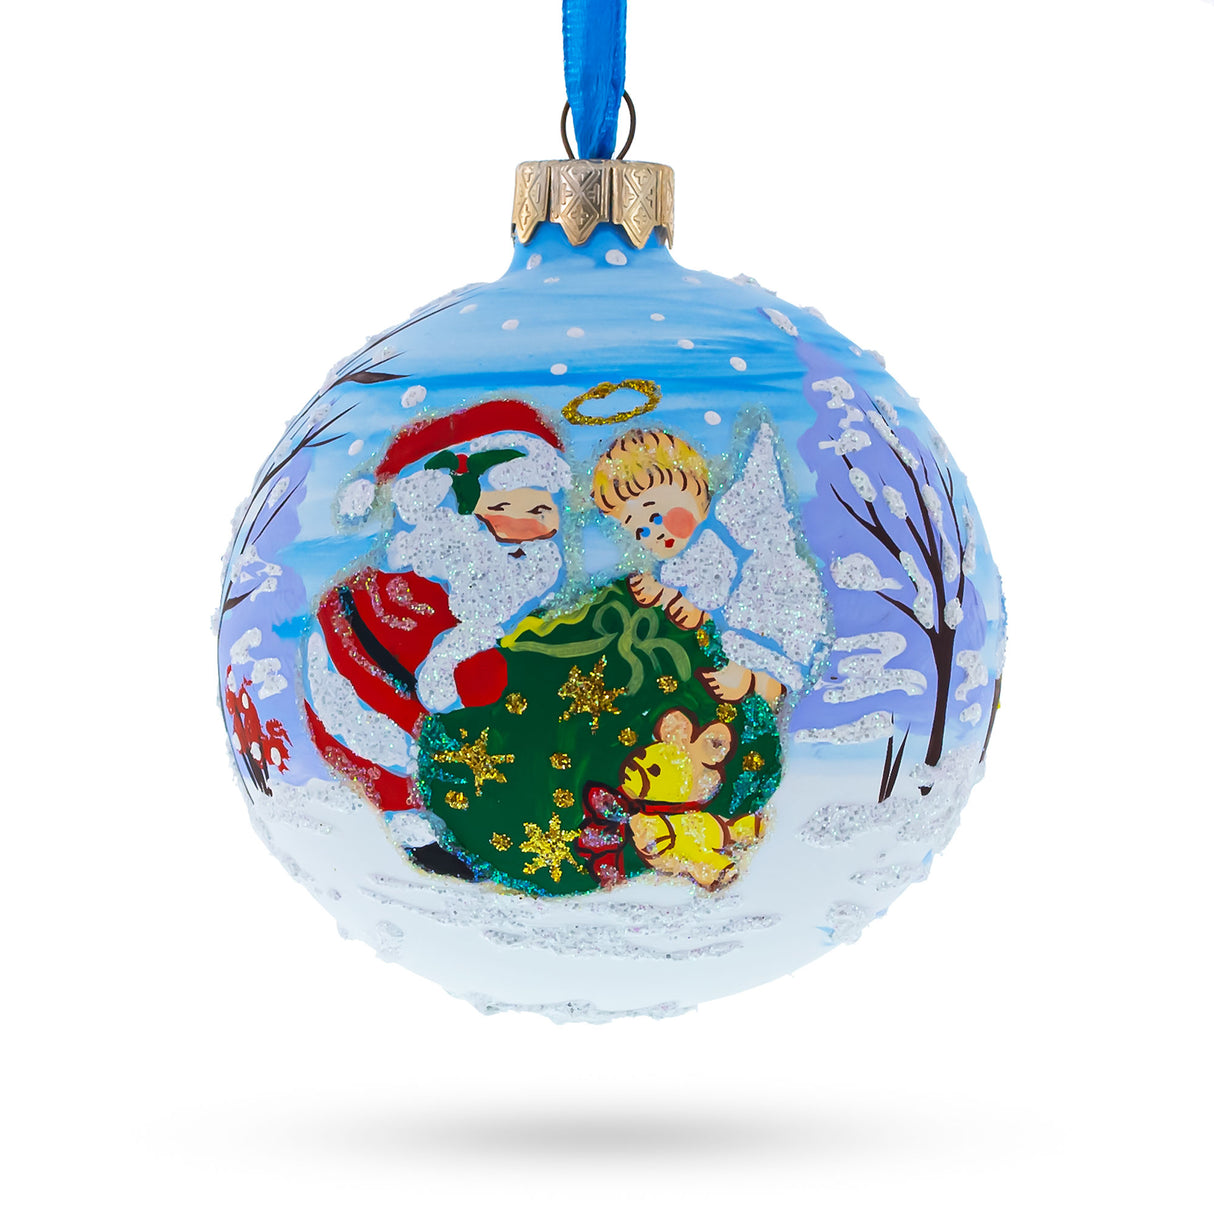 Glass Joyful Angel Helping Santa with Christmas Gifts - Blown Glass Ball Christmas Ornament 3.25 Inches in Multi color Round